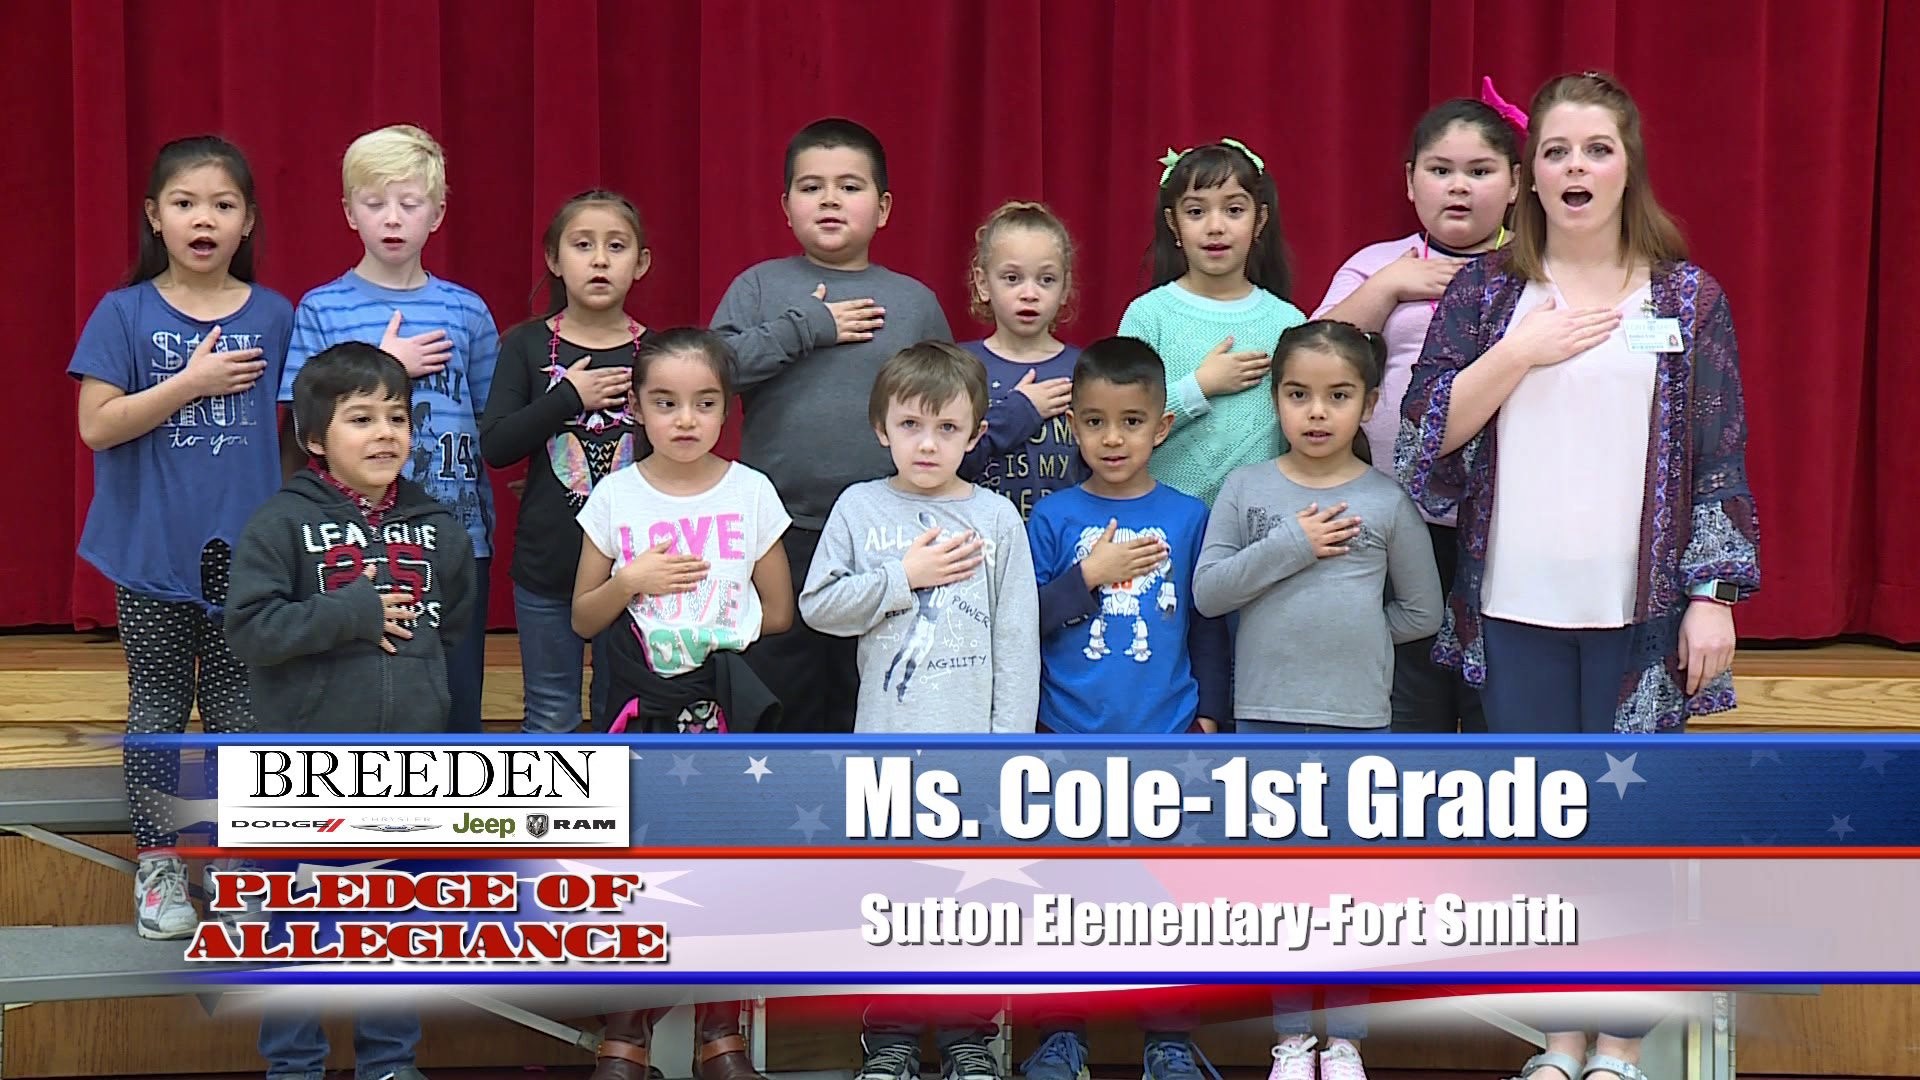 Sutton Elementary, Fort Smith - Ms. Cole - 1st Grade